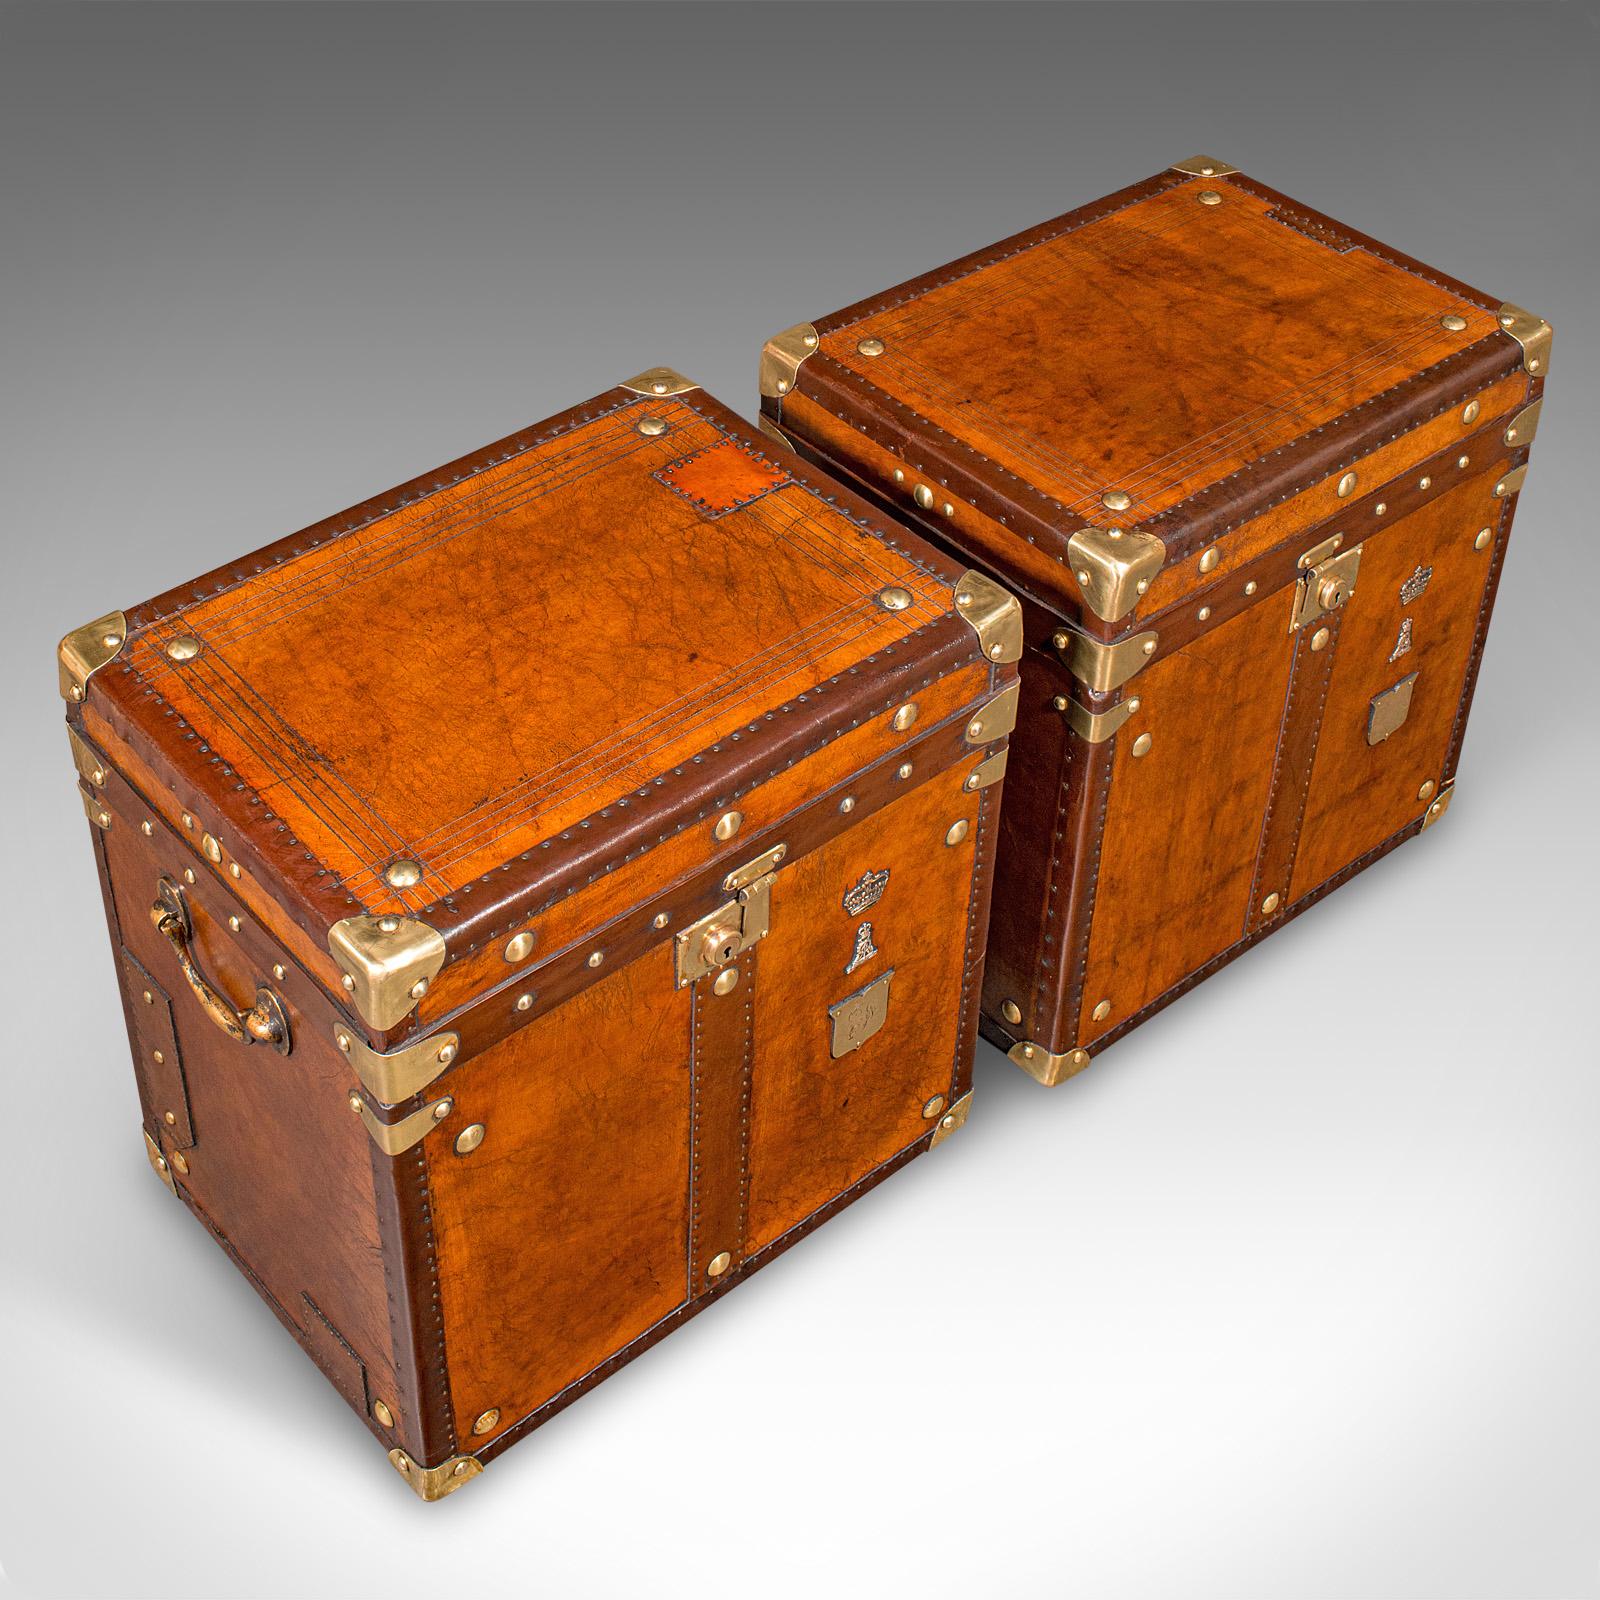 Pair Of Vintage Campaign Luggage Cases, English, Leather, Bedroom Nightstands 1